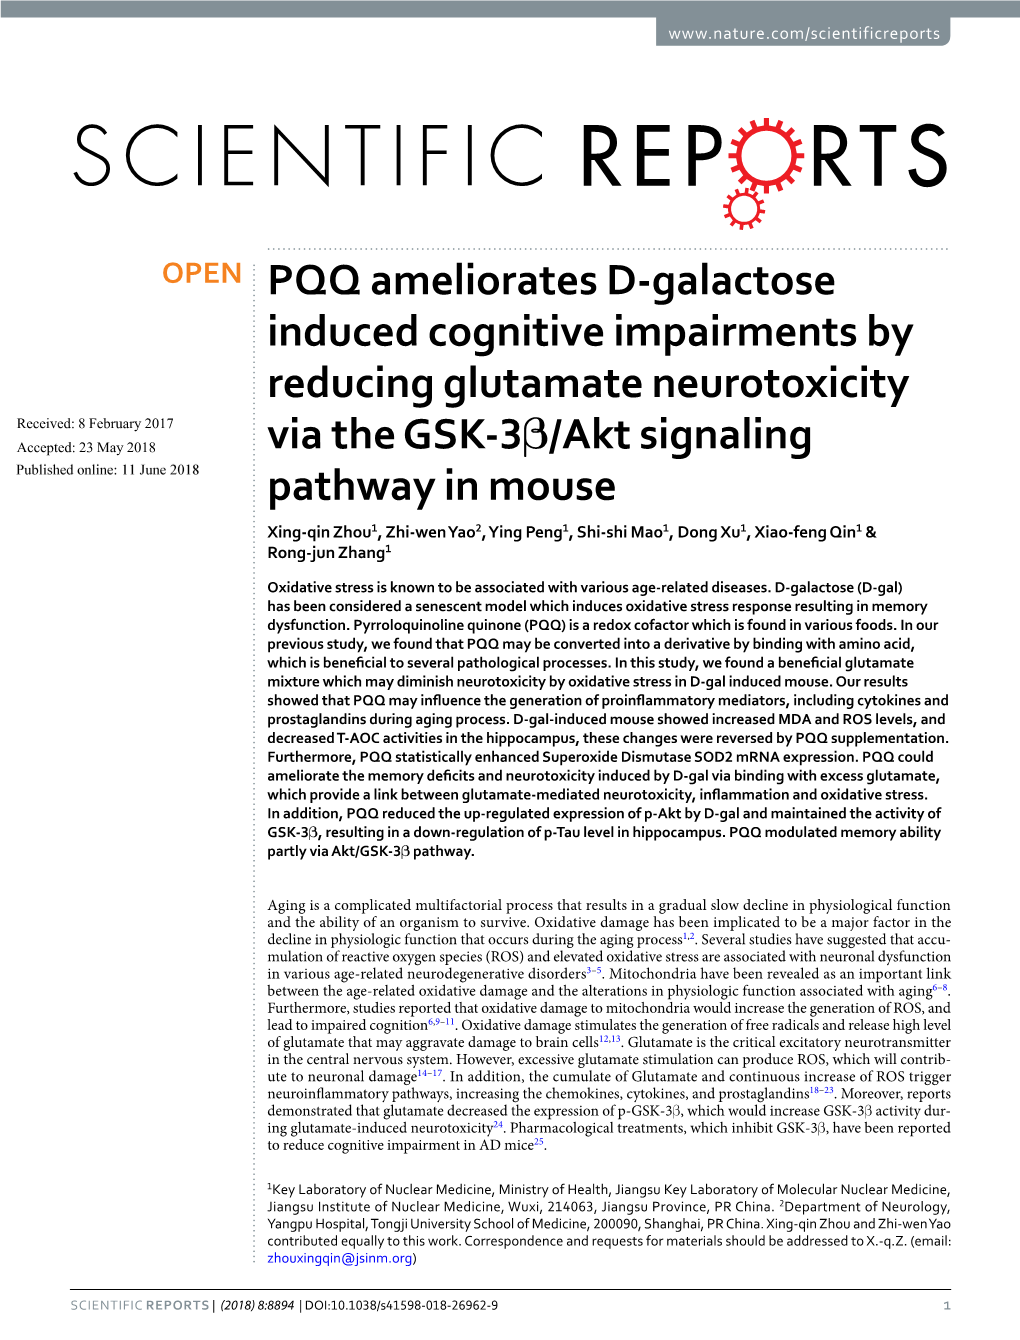 PQQ Ameliorates D-Galactose Induced Cognitive Impairments by Reducing